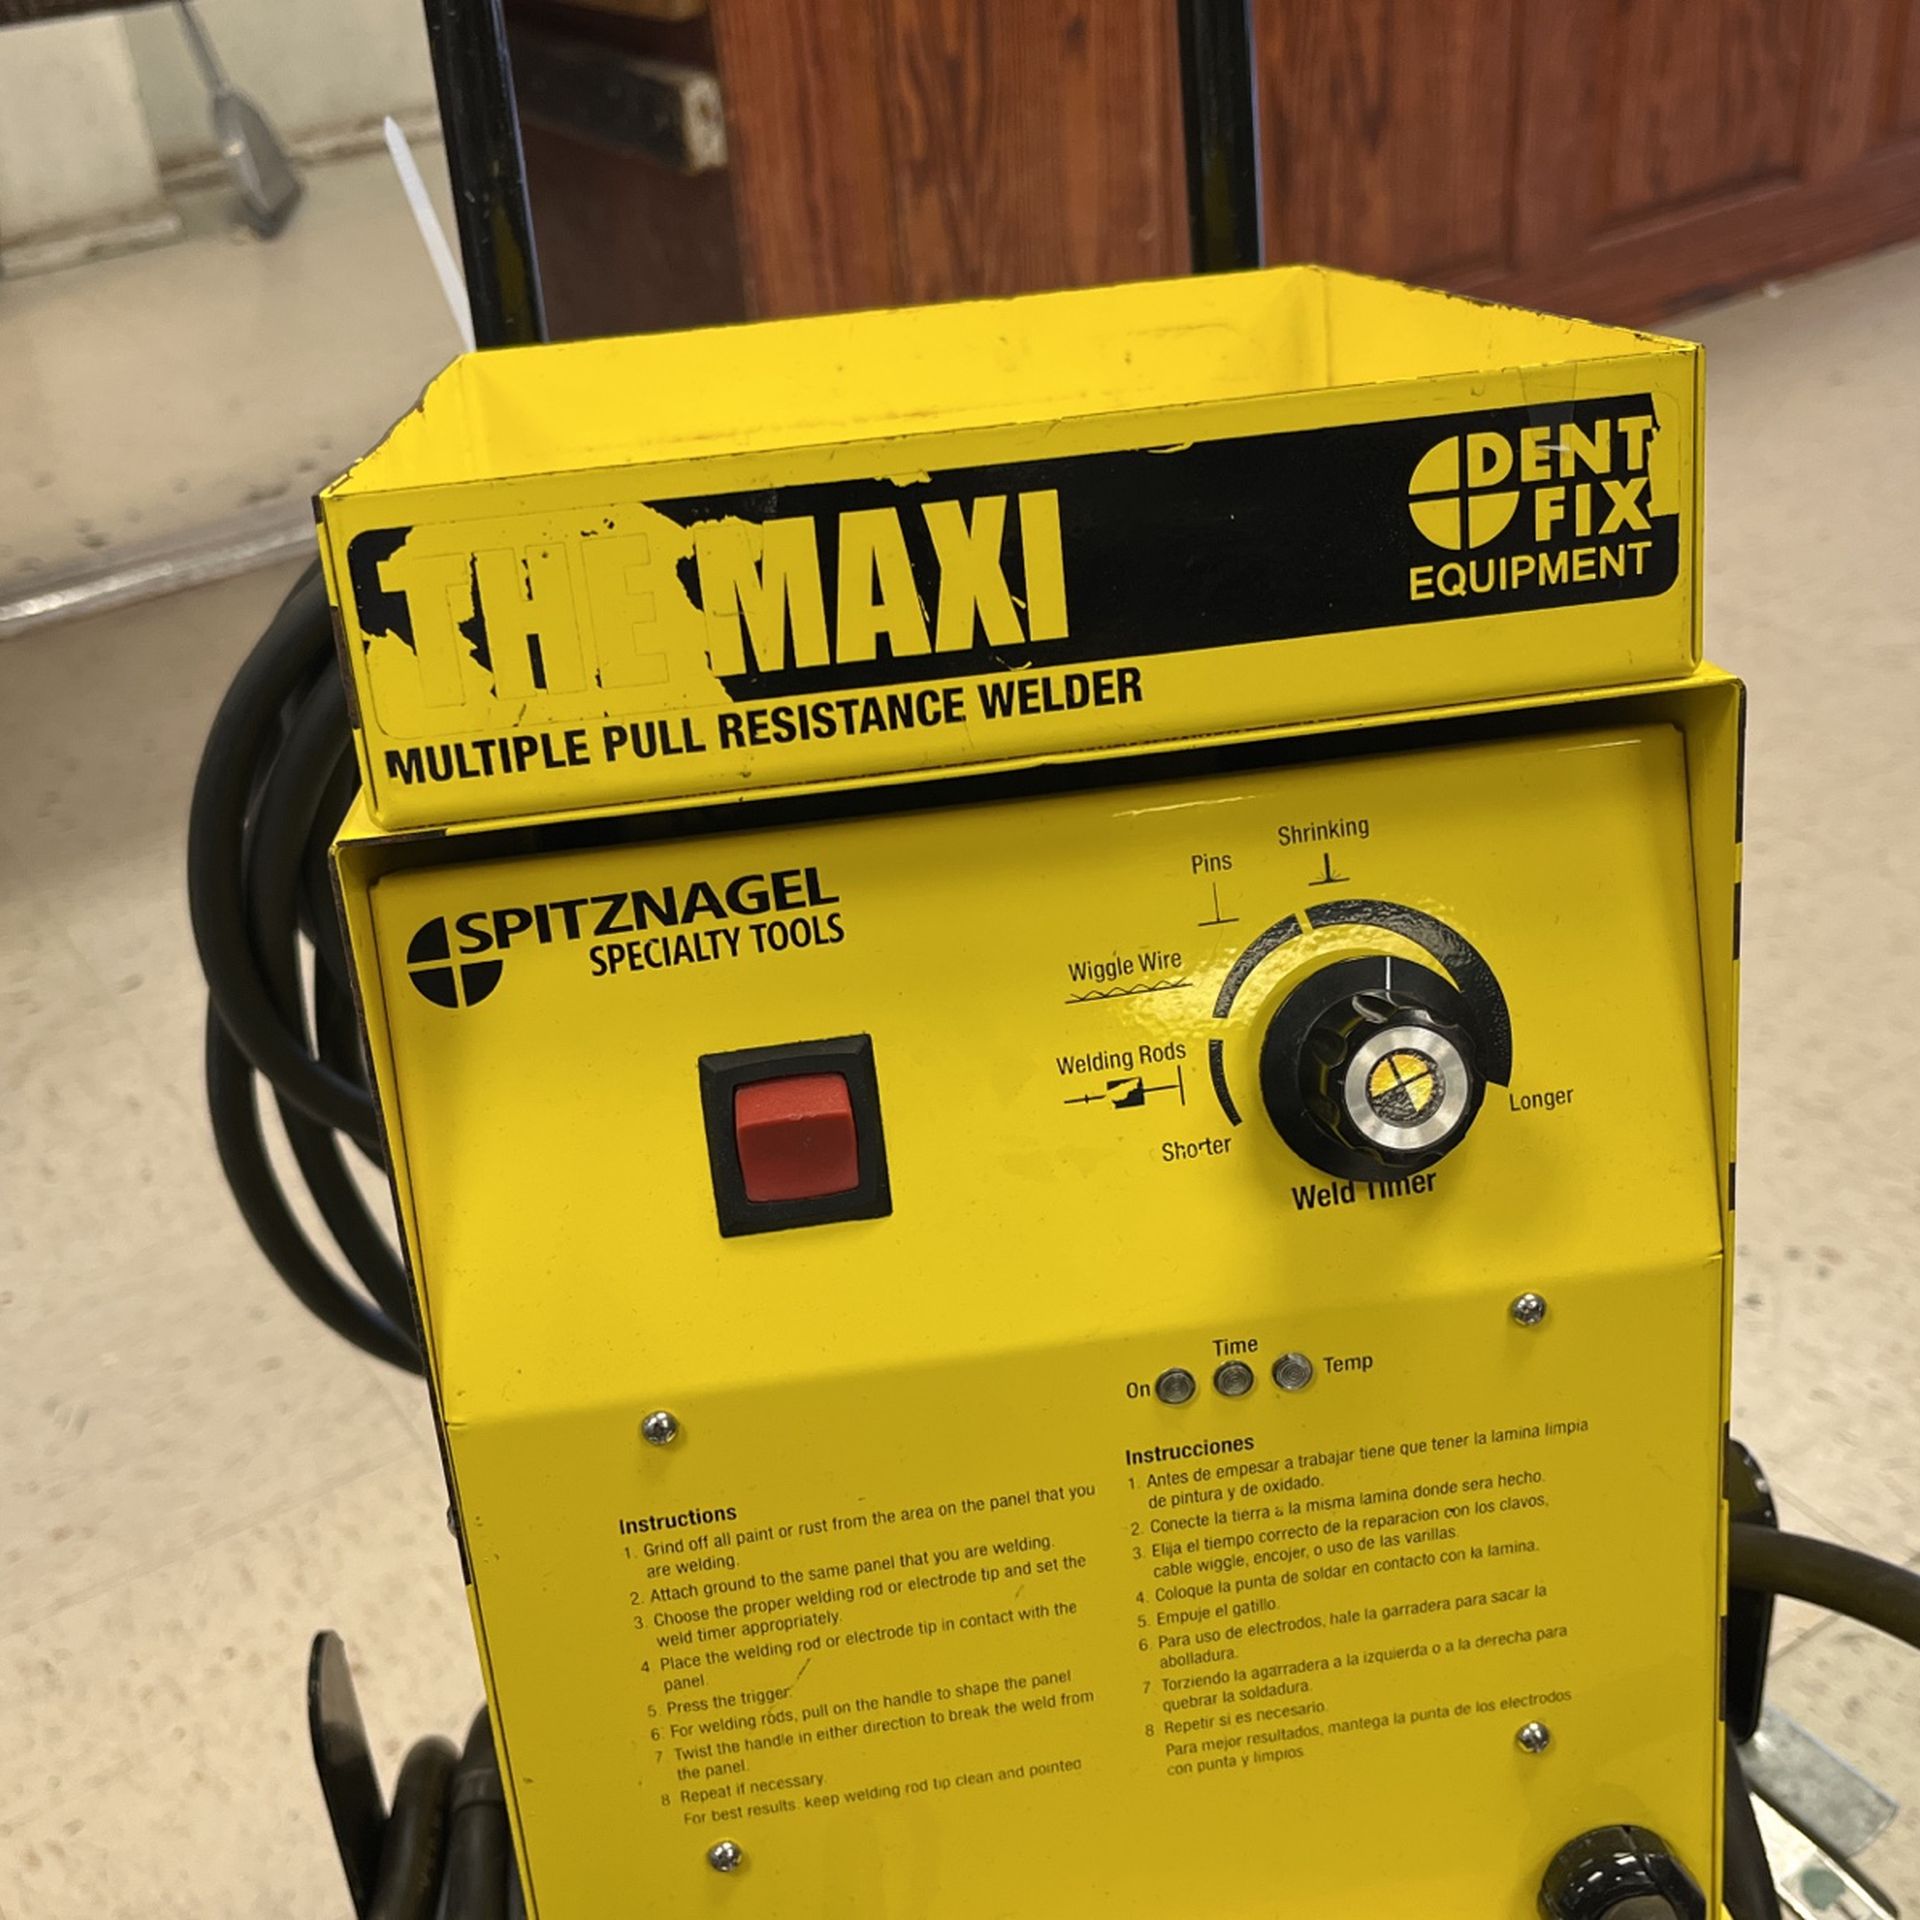 The Maxi Multiple Pull Resistance Welder